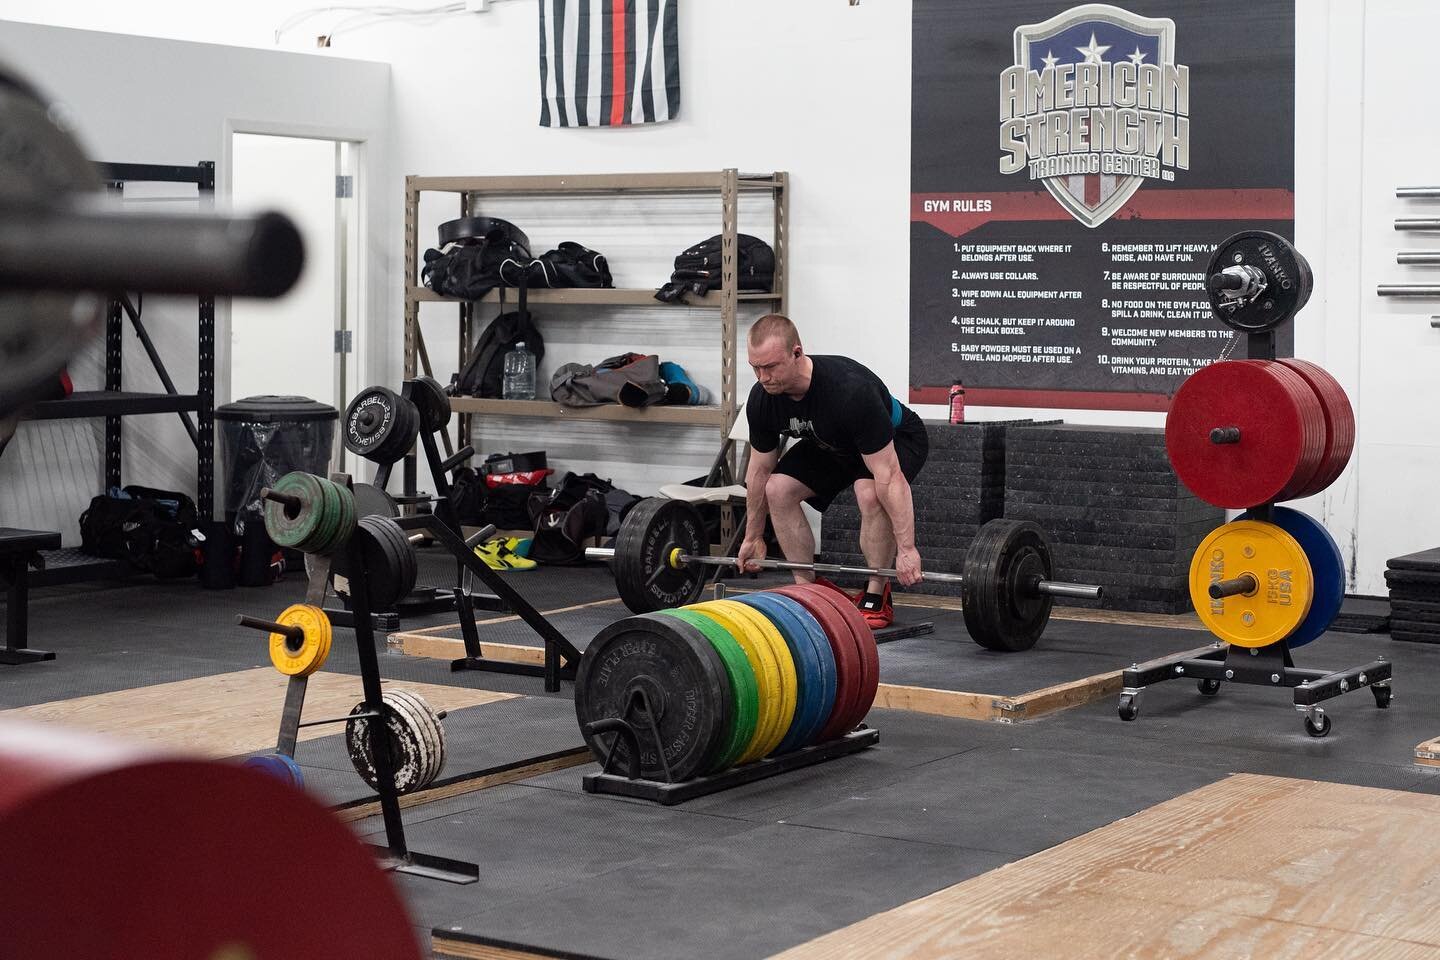 More than just a gym. ⁣
⁣
American Strength is Minnesota&rsquo;s Elite Training Center. ⁣

more info👇🏼⁣
americanstrengthmn.com⁣

#americanstrength 
#americanstrengthtrainingcenter 
#gym ⁣
#powerlifting 
#powerliftingmotivation⁣
#coach #coaching #st